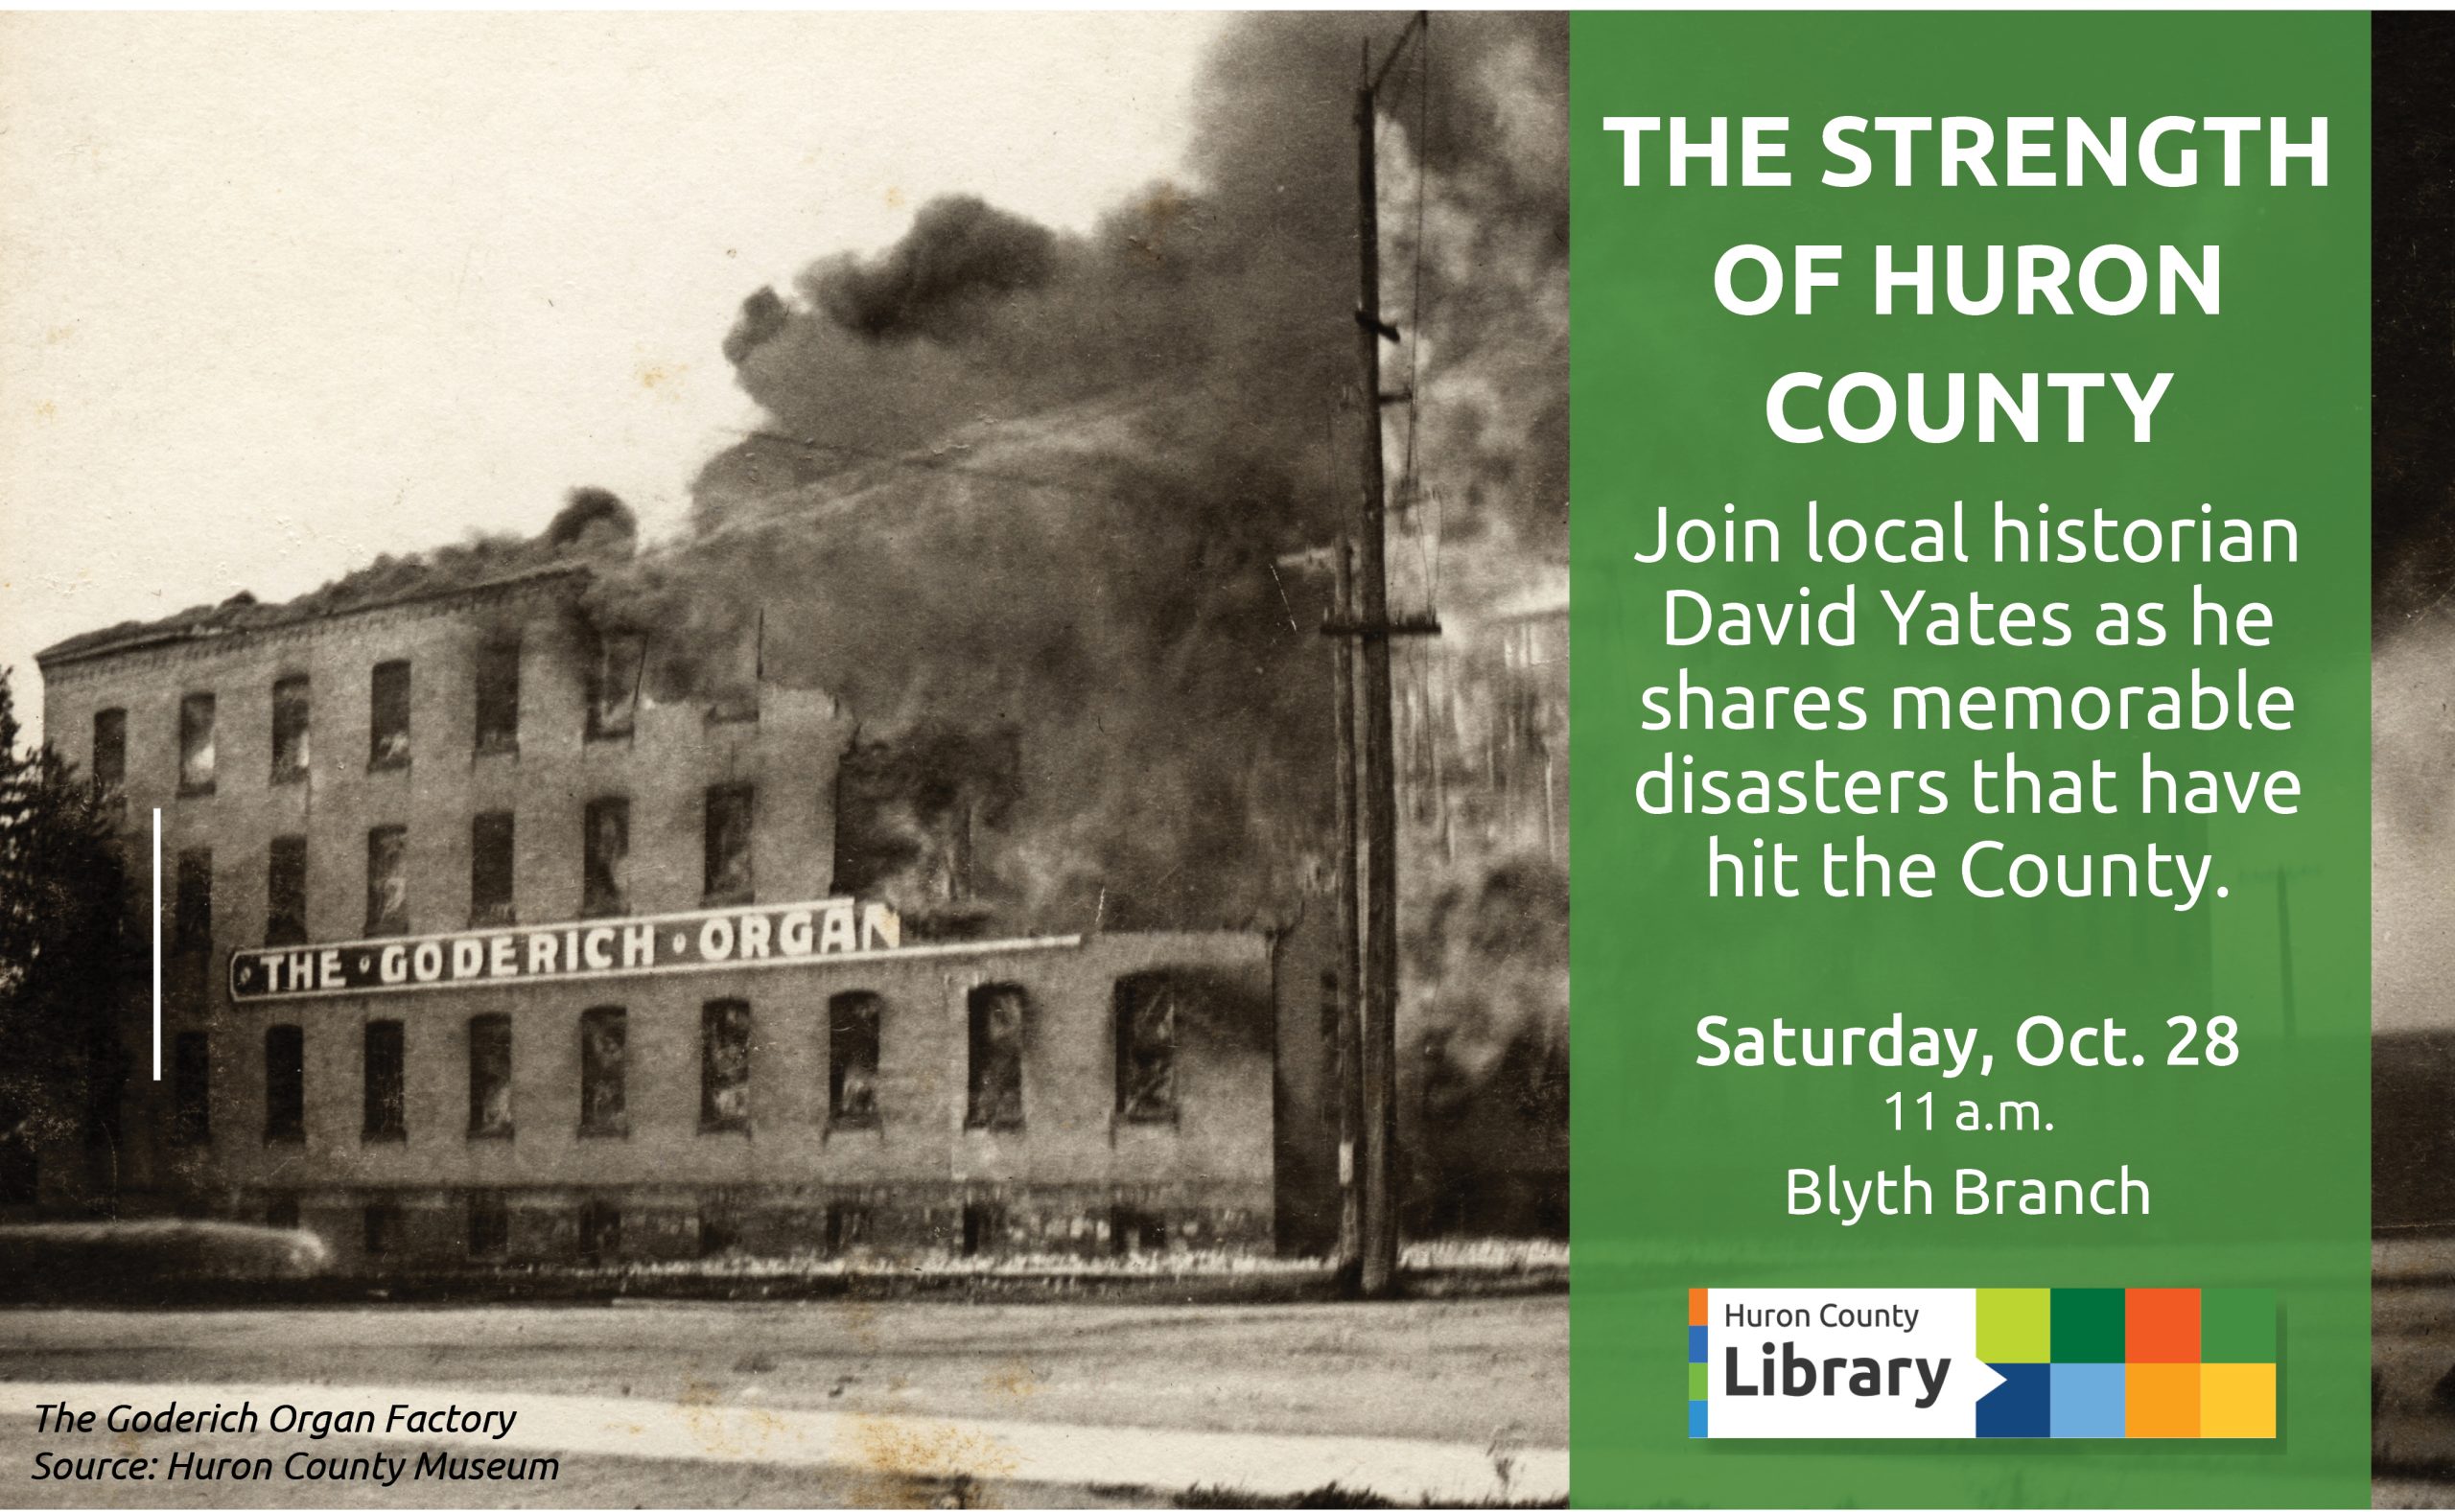 Historic image of the Goderich organ factory on fire with text promoting The Strength of Huron County at Blyth Branch